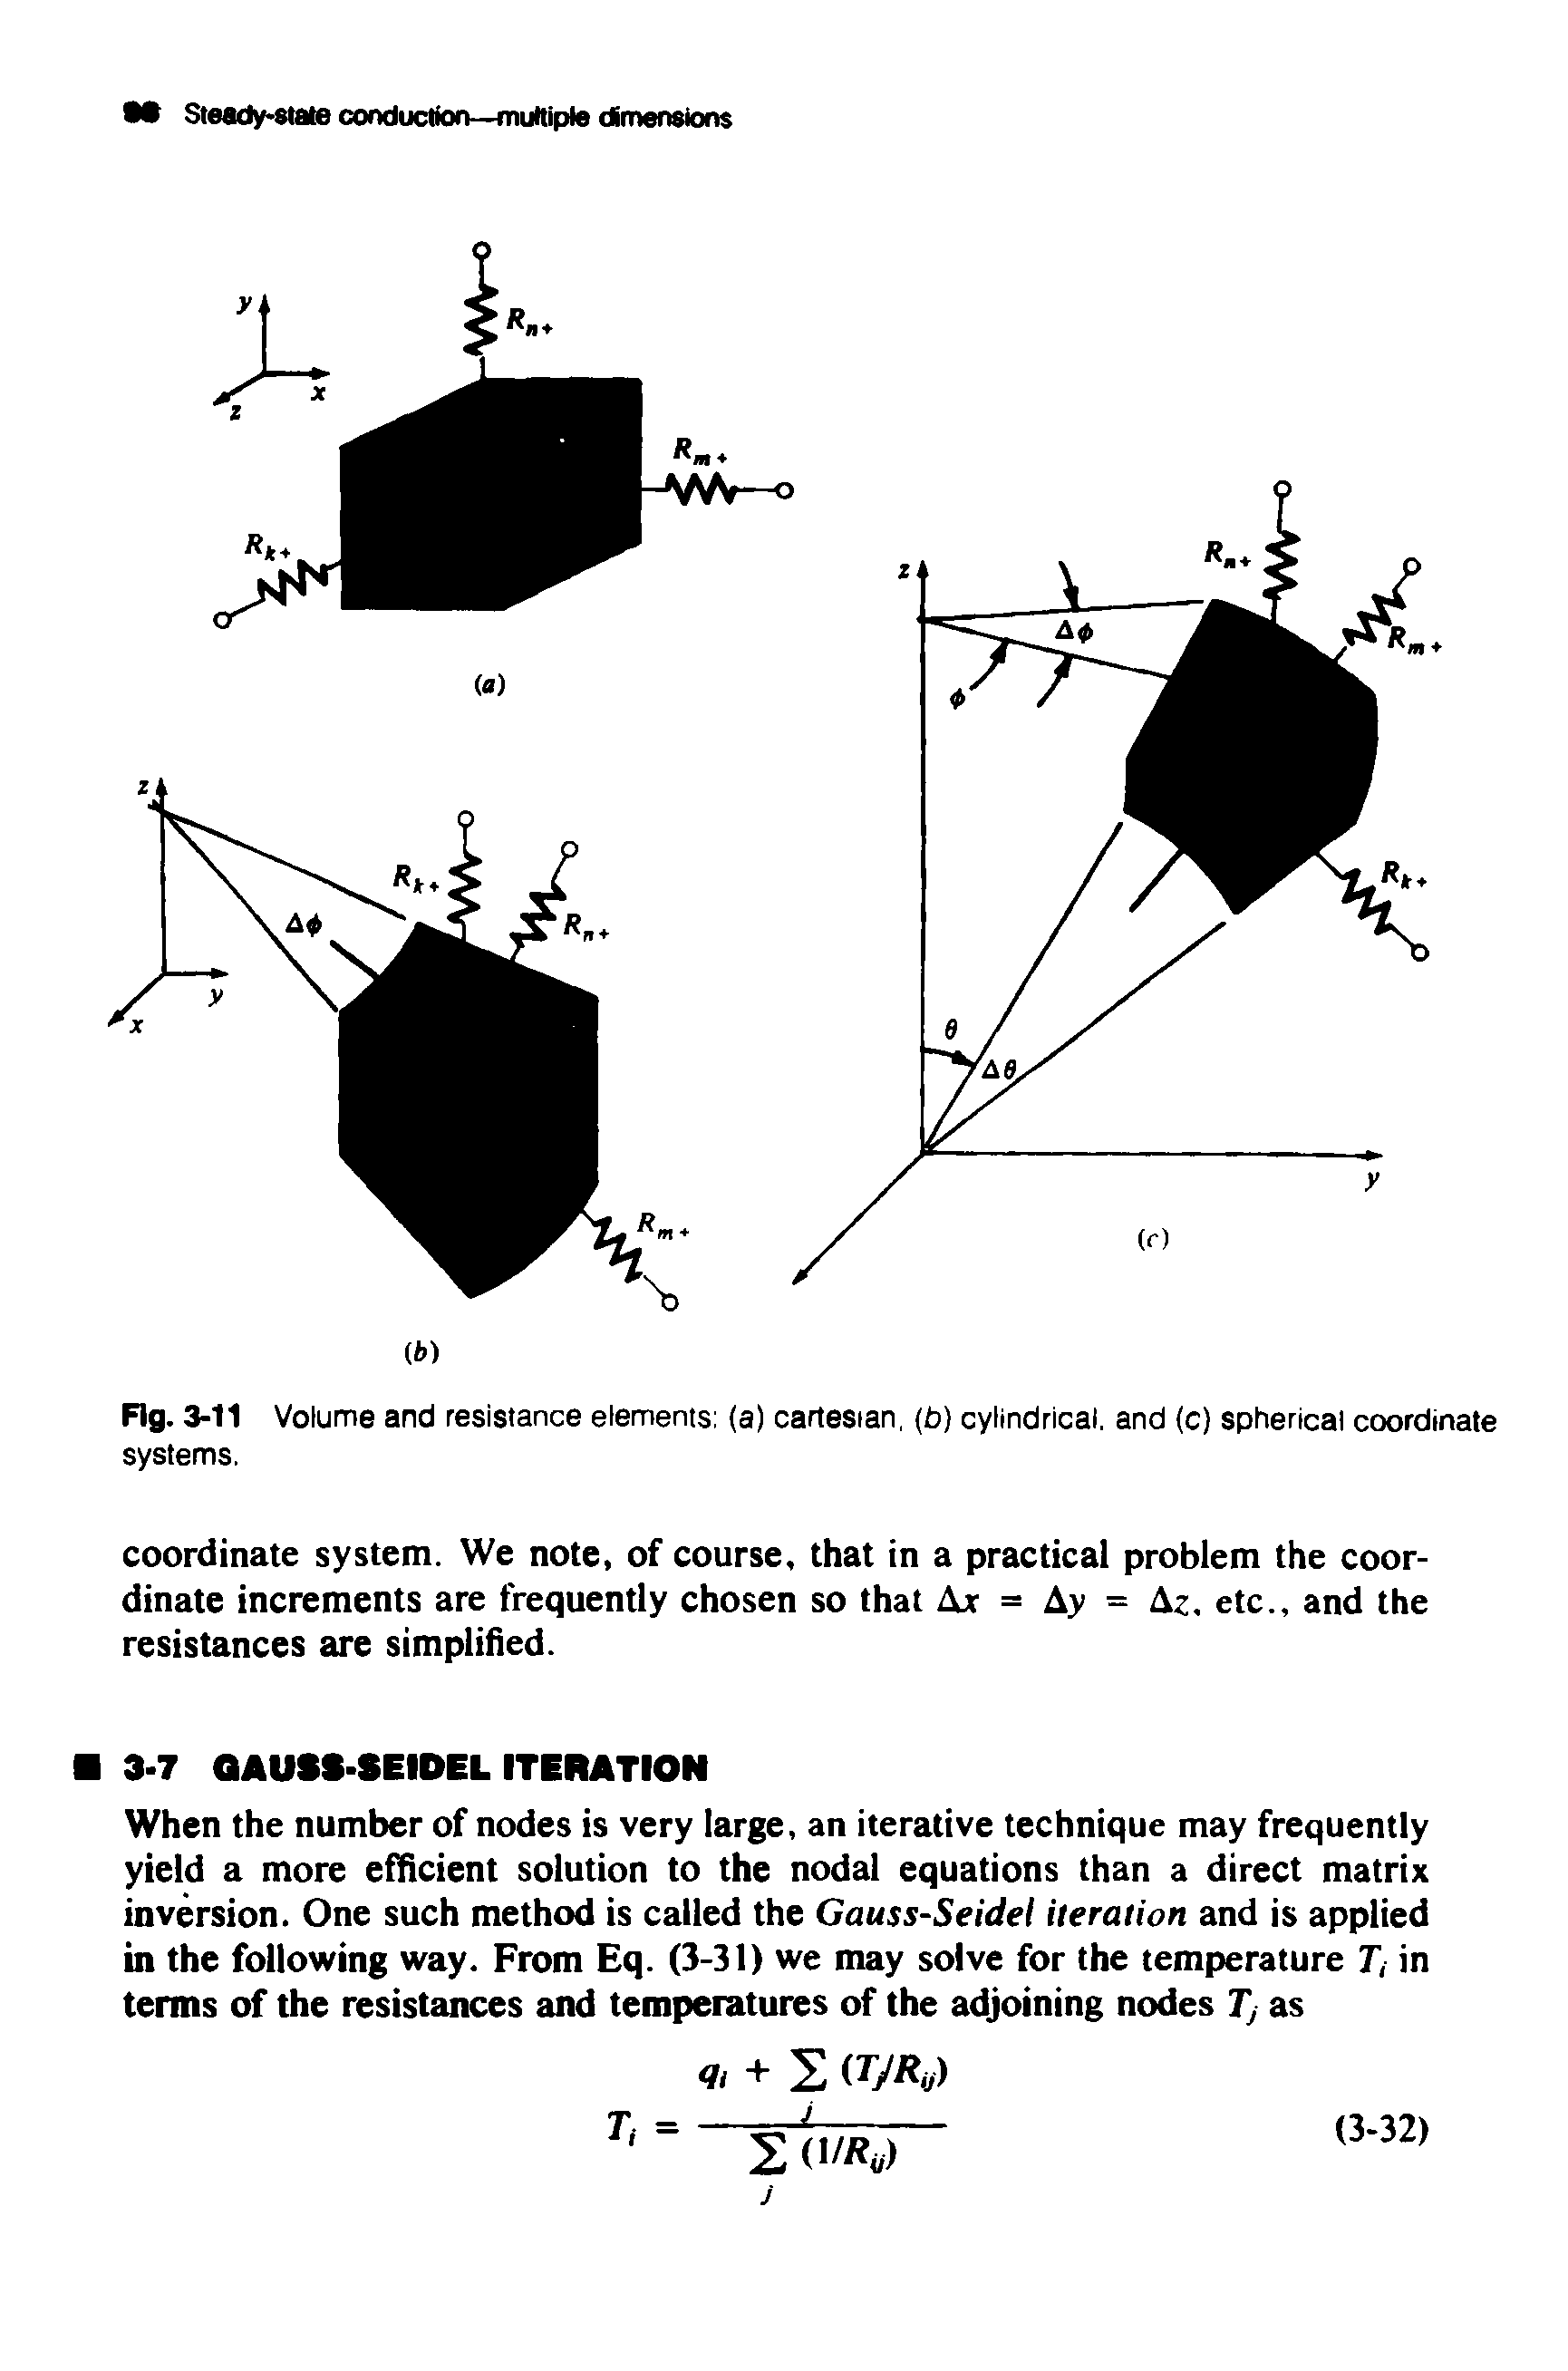 Fig. 3-11 Volume and resistance elements (a) cartesian, (b) cylindrical, and (c) spherical coordinate systems.